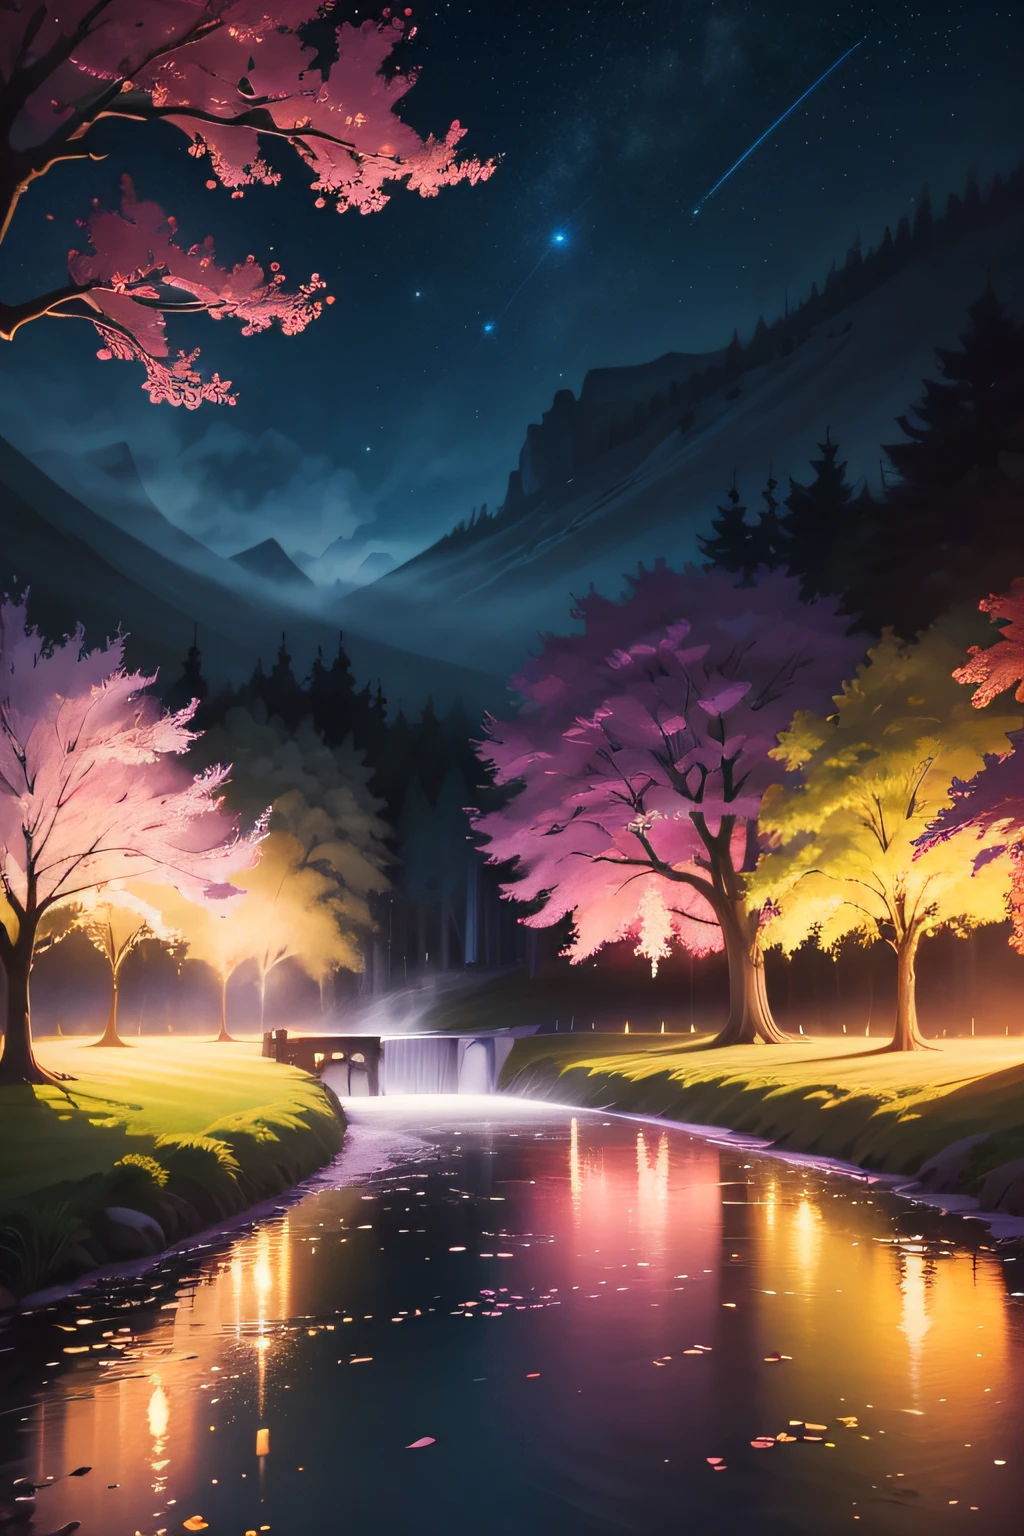 nigth，mont，Rose garden,Skysky，the space，starrysky,Skysky，galaxias，depth of fields，Light，Mist，the cherry trees，Reallightandshadow，painting-like,Ethereal atmosphere,Vibrant colors,cinematic compositions，dream magical，hoang lap，Particle effect，diffused reflections，waterfallr，Colorful flowers,Butterflies dancing,Dreamy and whimsical,Peaceful and charming,vibrant with colors,painting coming to life,Totally mesmerizing and fascinating,Simply breathtaking.(Best quality,4K,8K,A high resolution,Masterpiece:1.2),Ultra-detailed,